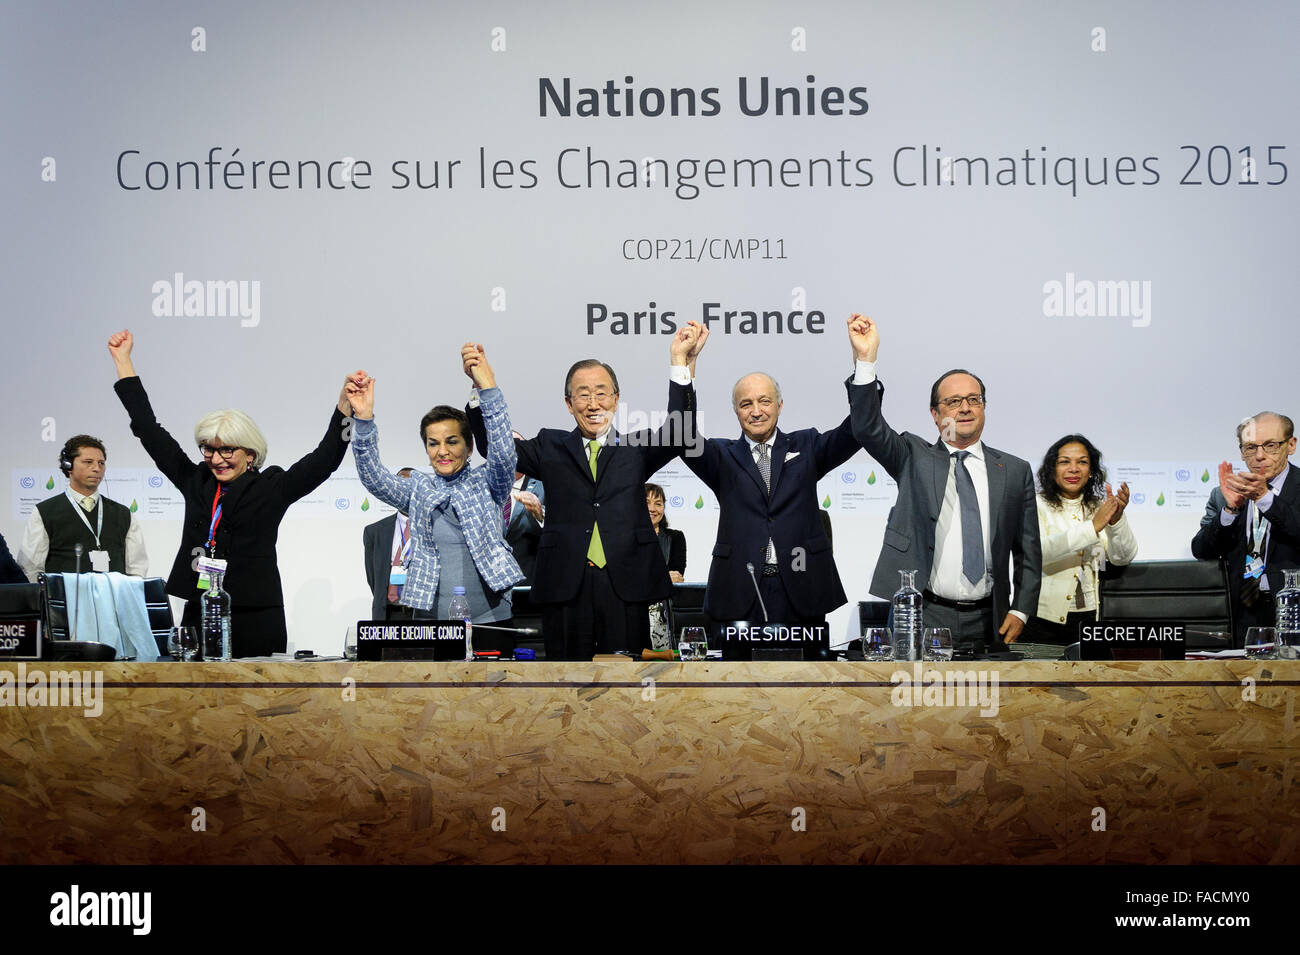 Leaders of the COP21, United Nations Climate Change Conference celebrate reaching a global agreement on greenhouse gas emissions December 12, 2015 in Le Bourget, France. (L-R) include: Special Representative Laurence Tubiana, U.N climate chief Christiana Figuere, United Nations Secretary General Ban ki-Moon, French Foreign Minister Laurent Fabius and French President Francois Hollande. Stock Photo